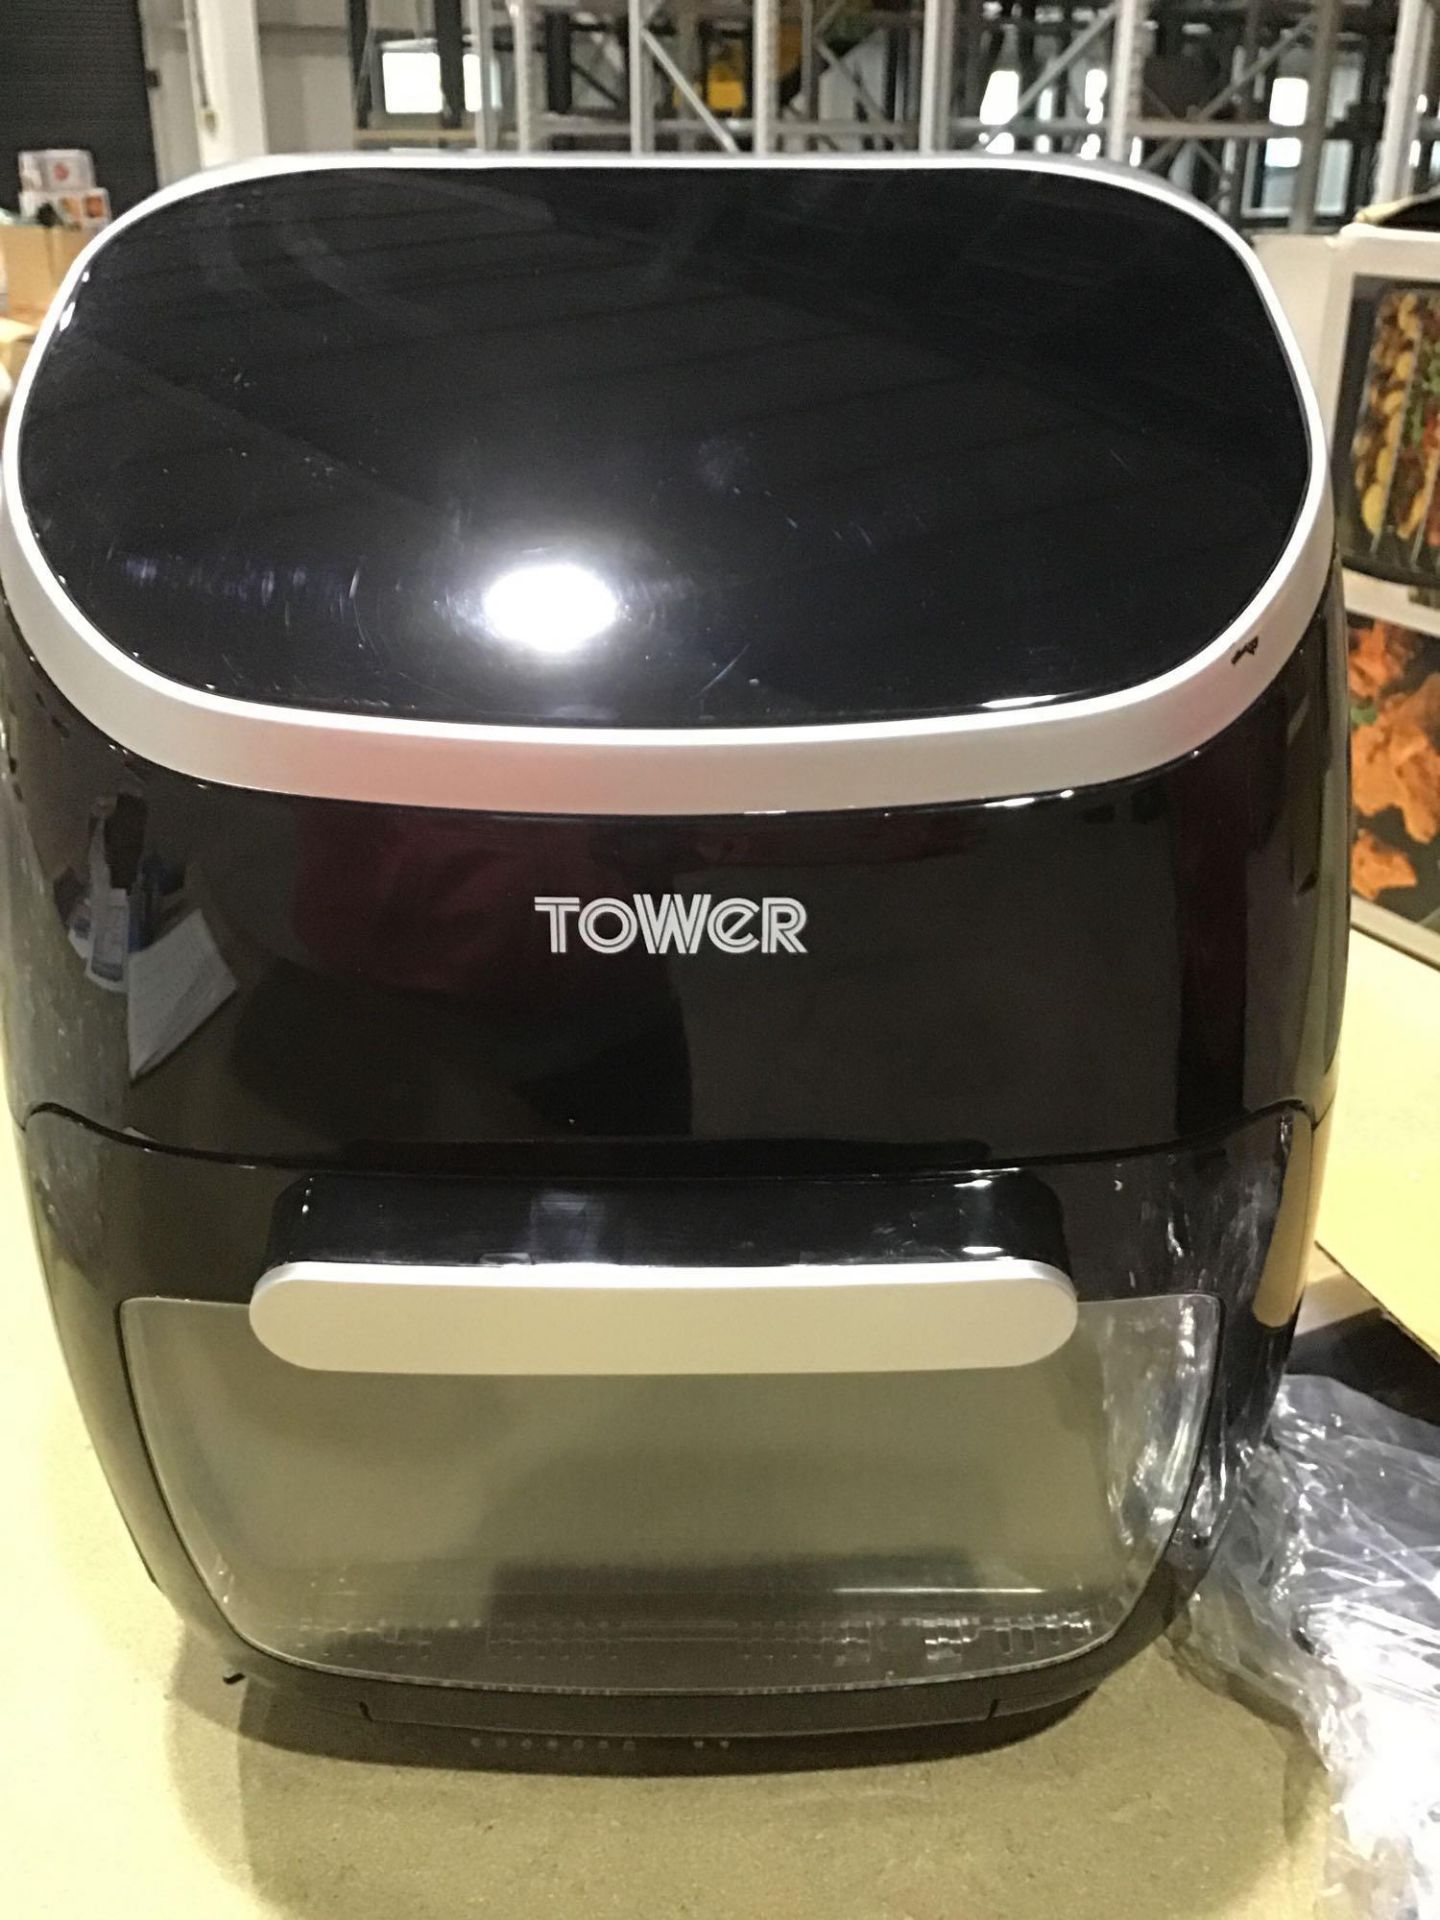 Tower T17039 Digital Air Fryer Oven, 11 Litre, Digital Display with 60 Minute Timer £86.99 RRP - Image 2 of 4